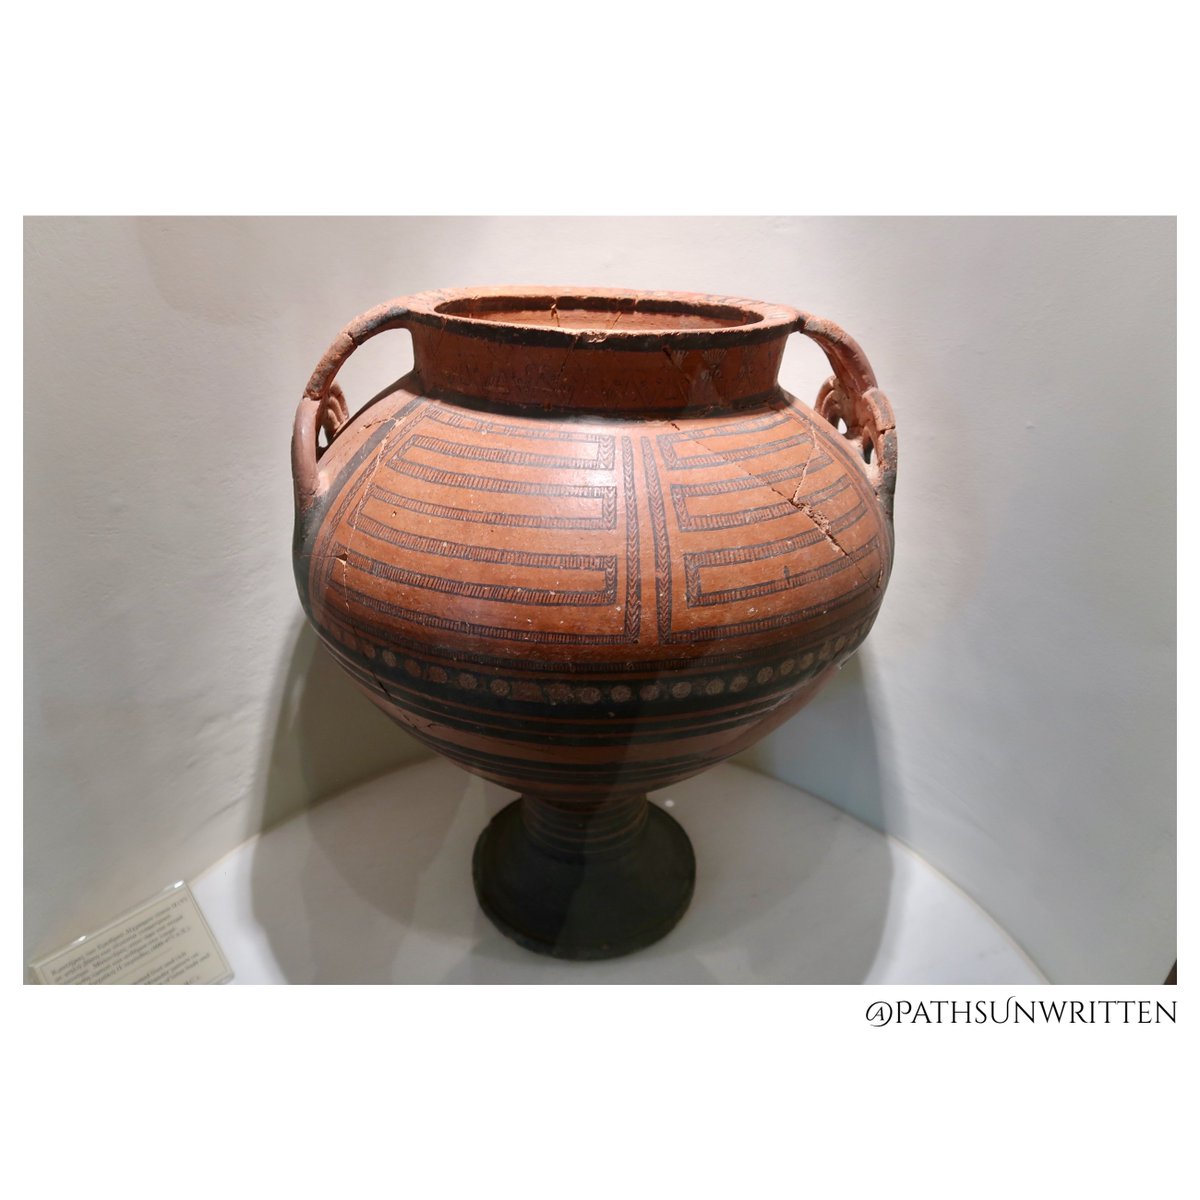 Stemmed crater with geometric pattern decoration. Dated to c. 600-475 BCE (Cypro-Archaeic III period) and displayed at the Local Archaeological Museum of Marion - Arsinoe in Polis, Cyprus.

#ancientcyprus #cyprusarchaeology #geometricpottery #archaeology #cyprus